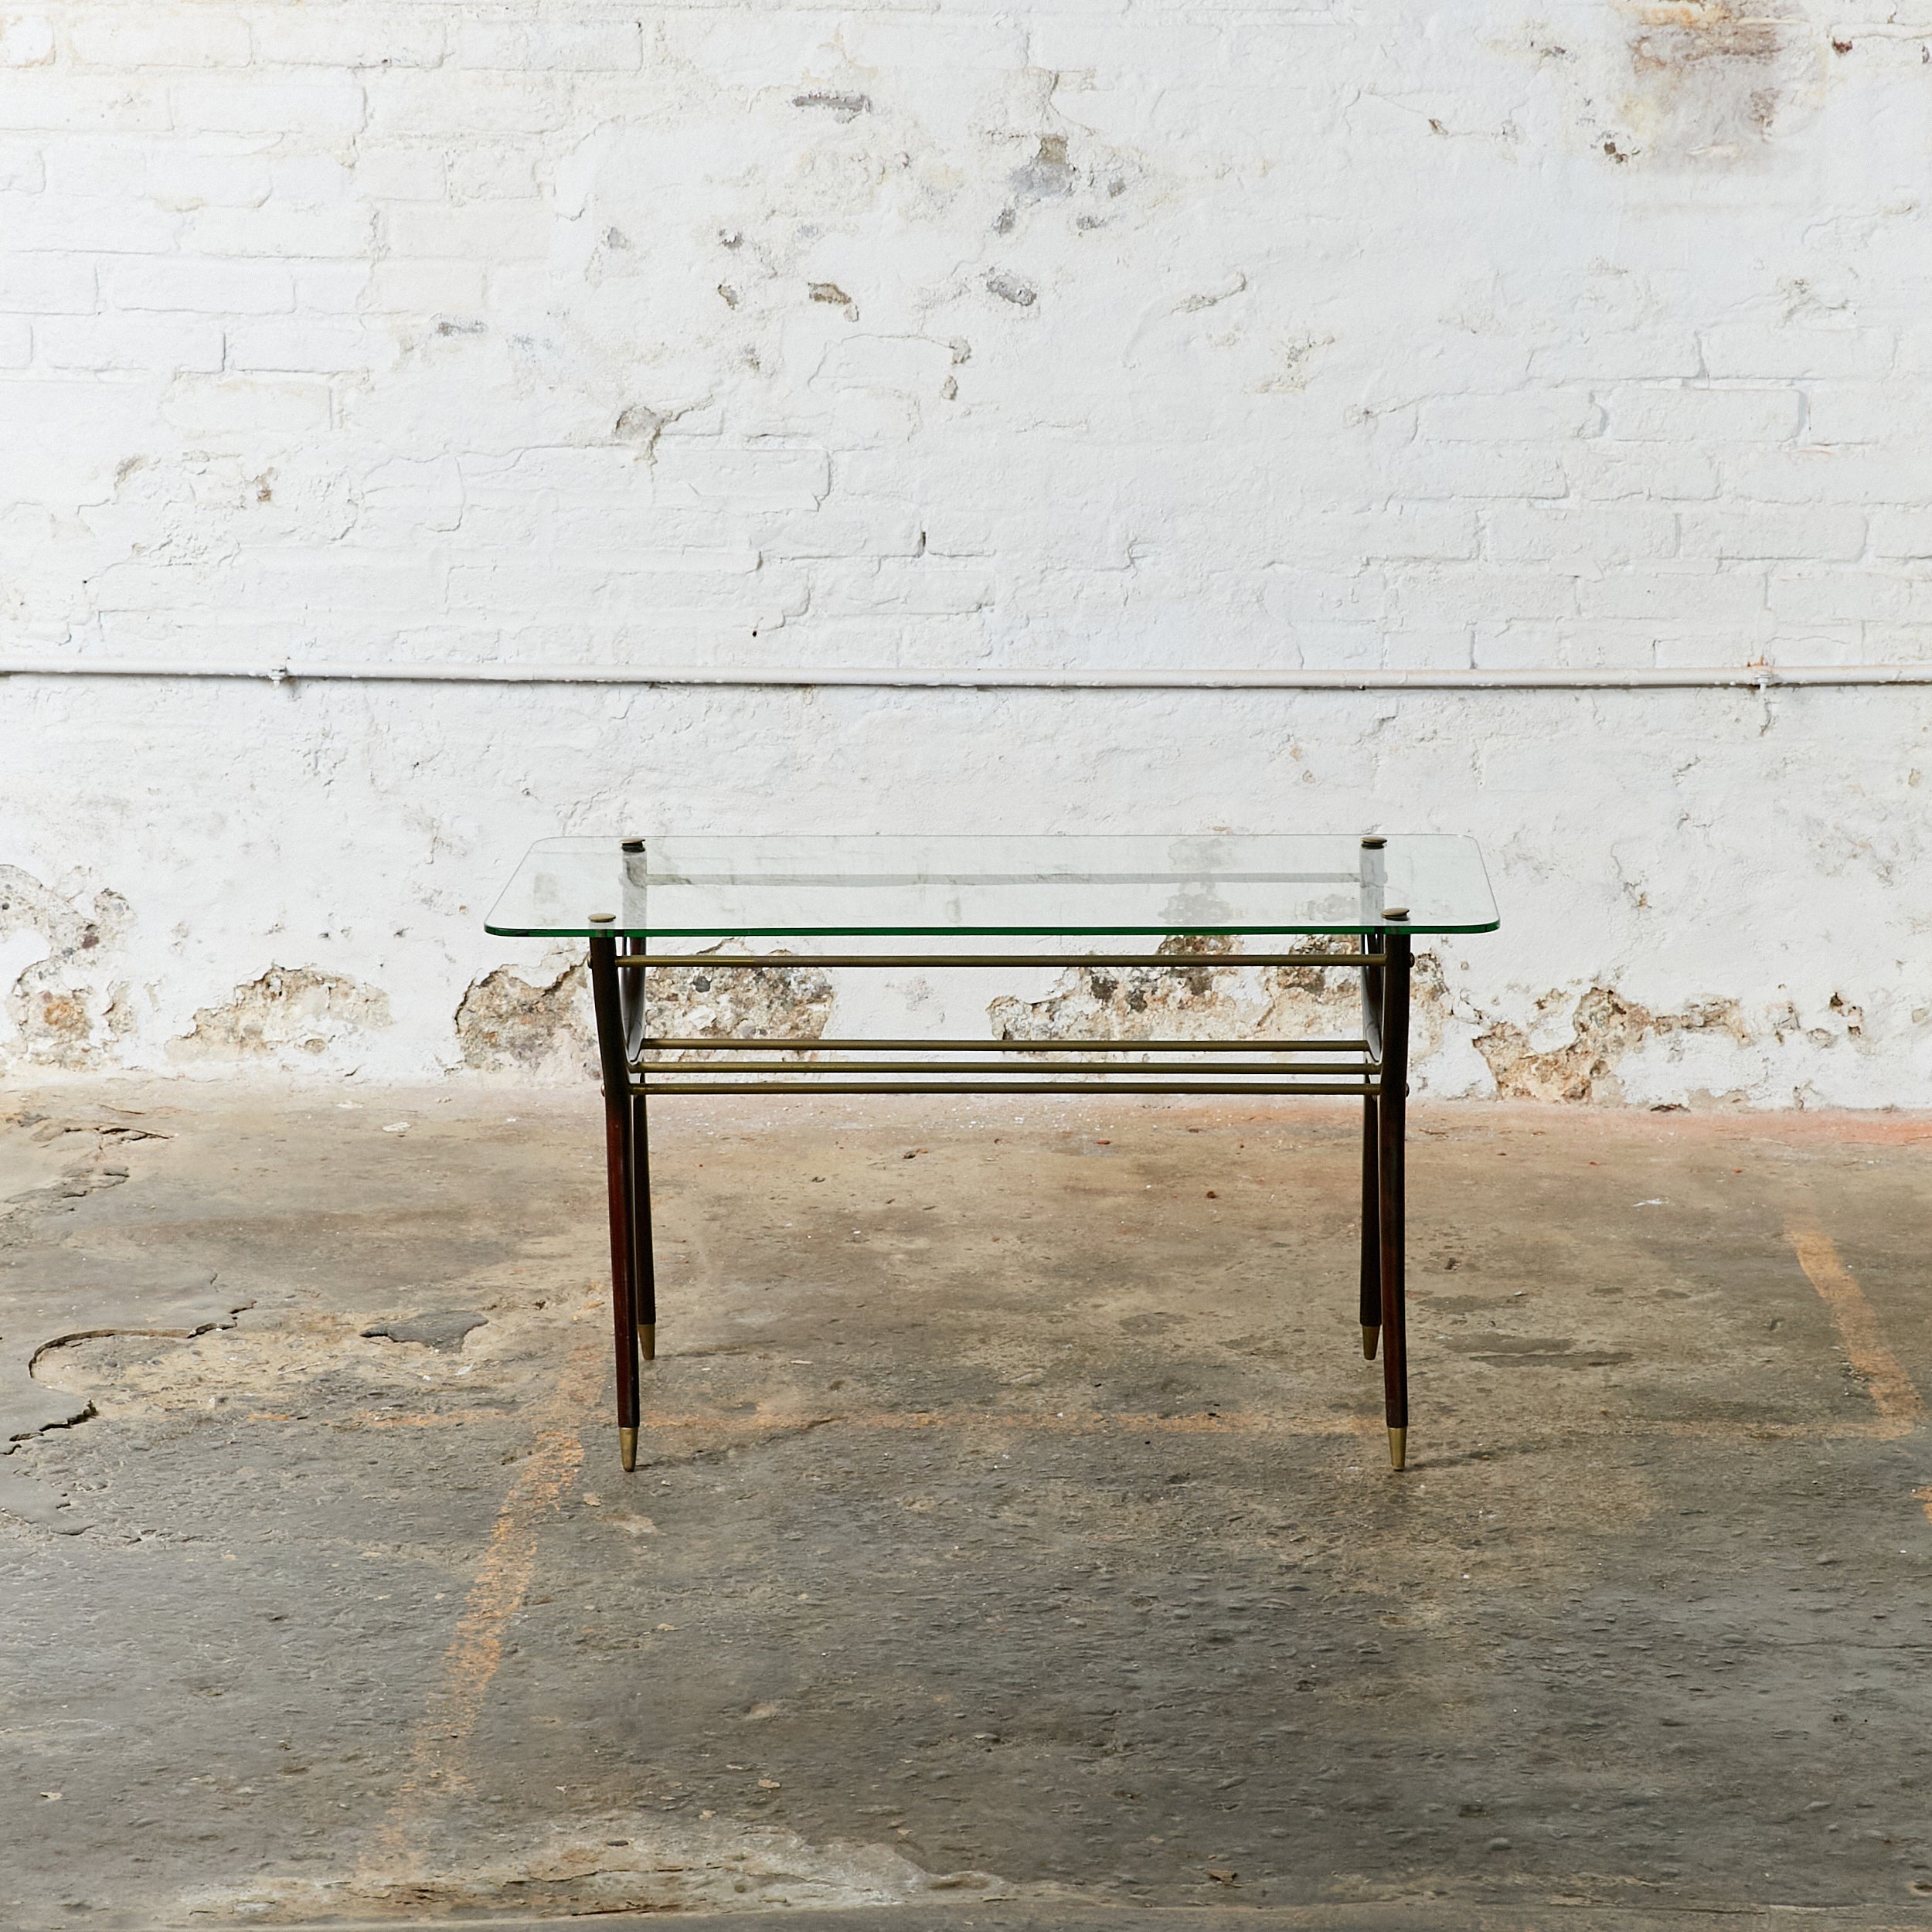 Italian side table in the style of Ico Parisi. Made of solid dark stained wood, brass details and clear glass top.